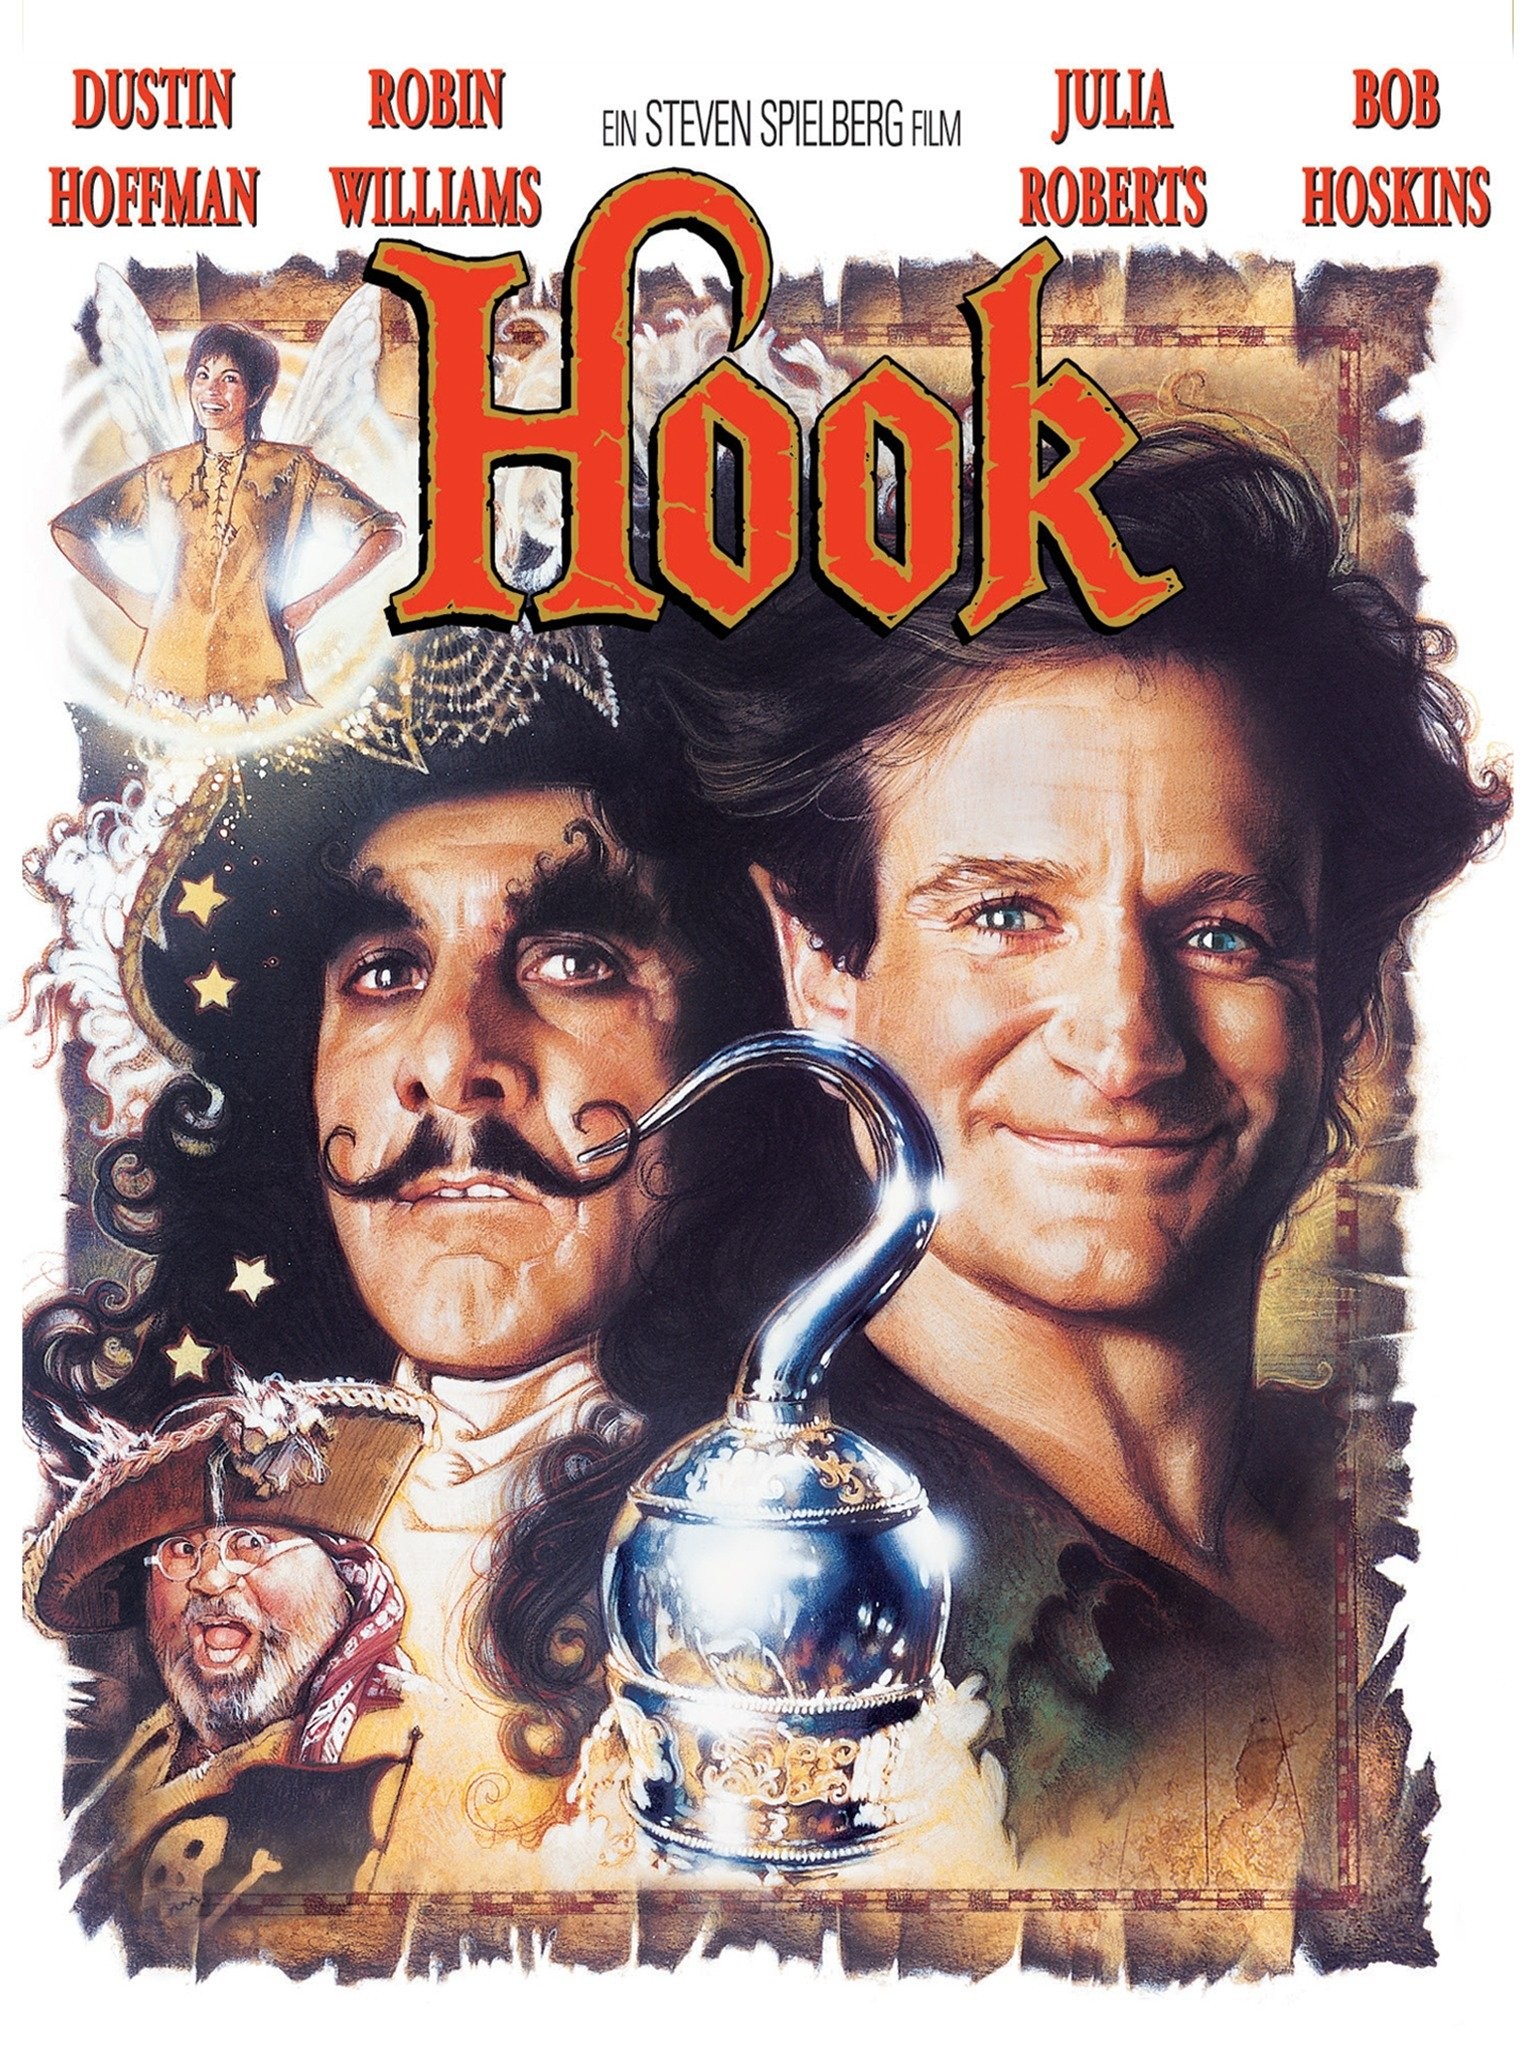 Custom 1/6th scale figure of Dustin Hoffman as 'Captain Hook' from